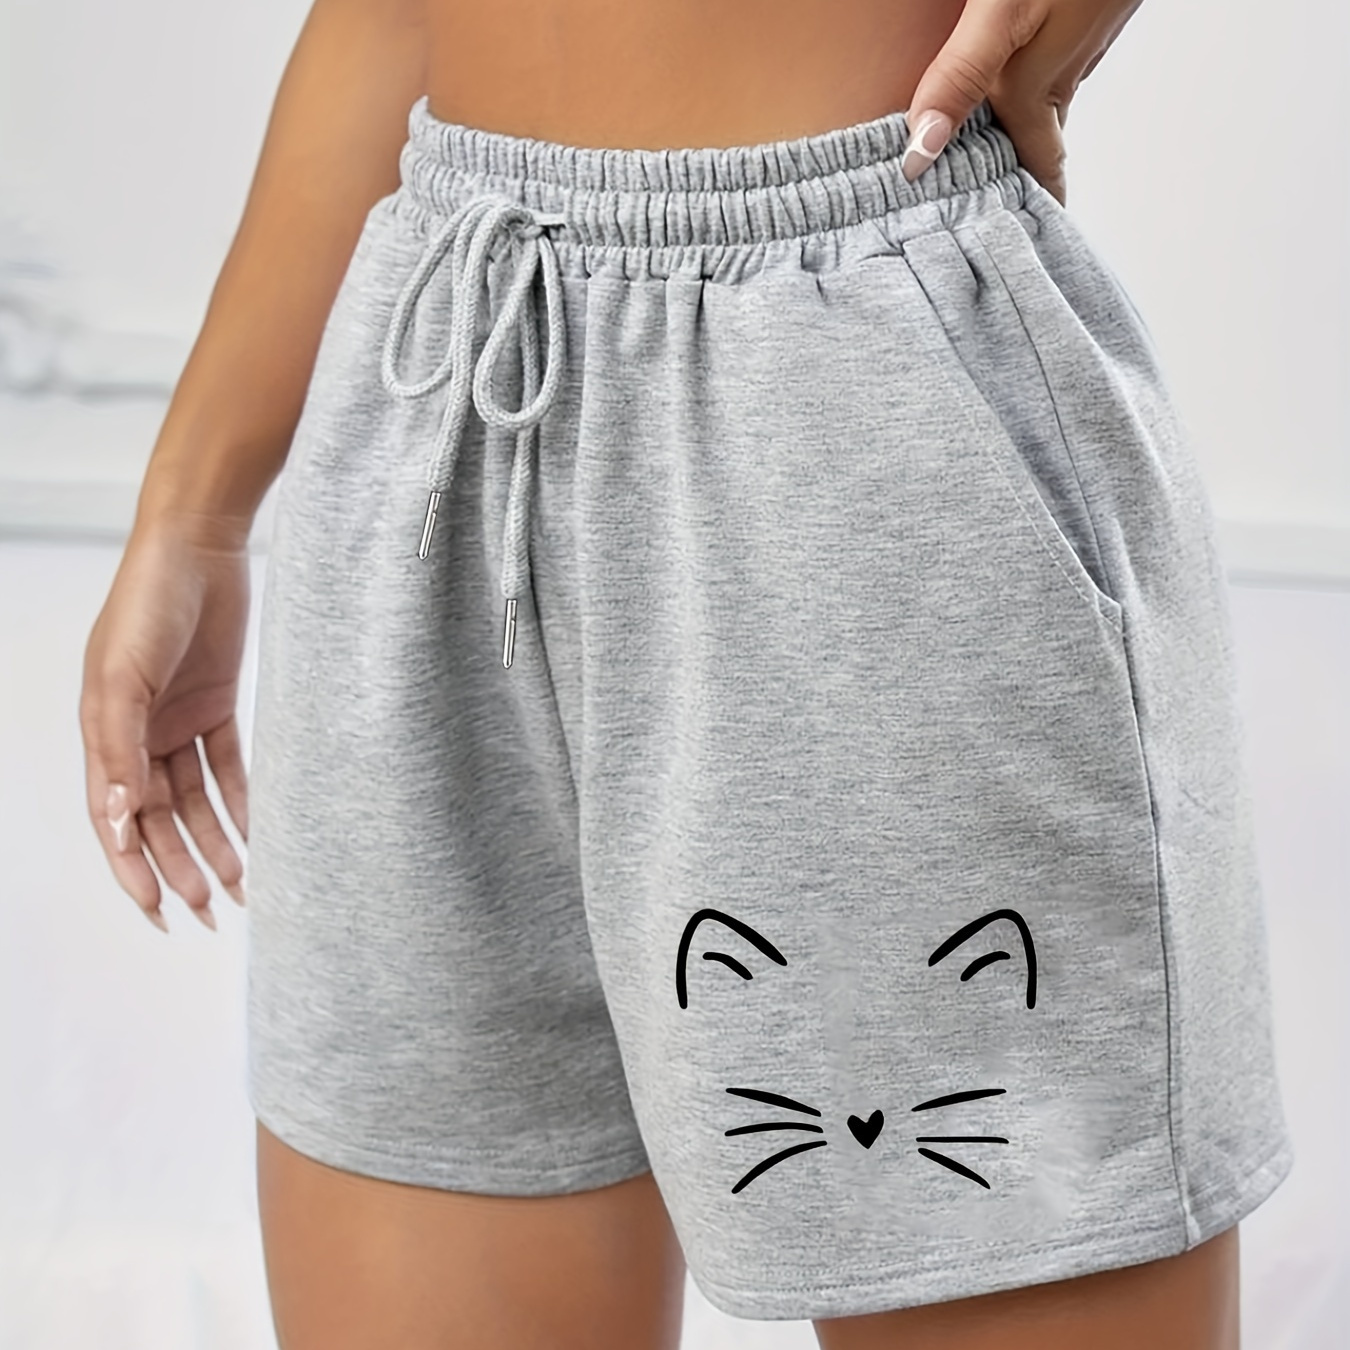 

Women's Casual Summer Shorts, Elastic Waist, Drawstring, With Cute Cat Face Print, Heather Grey, Comfortable Lounge Wear